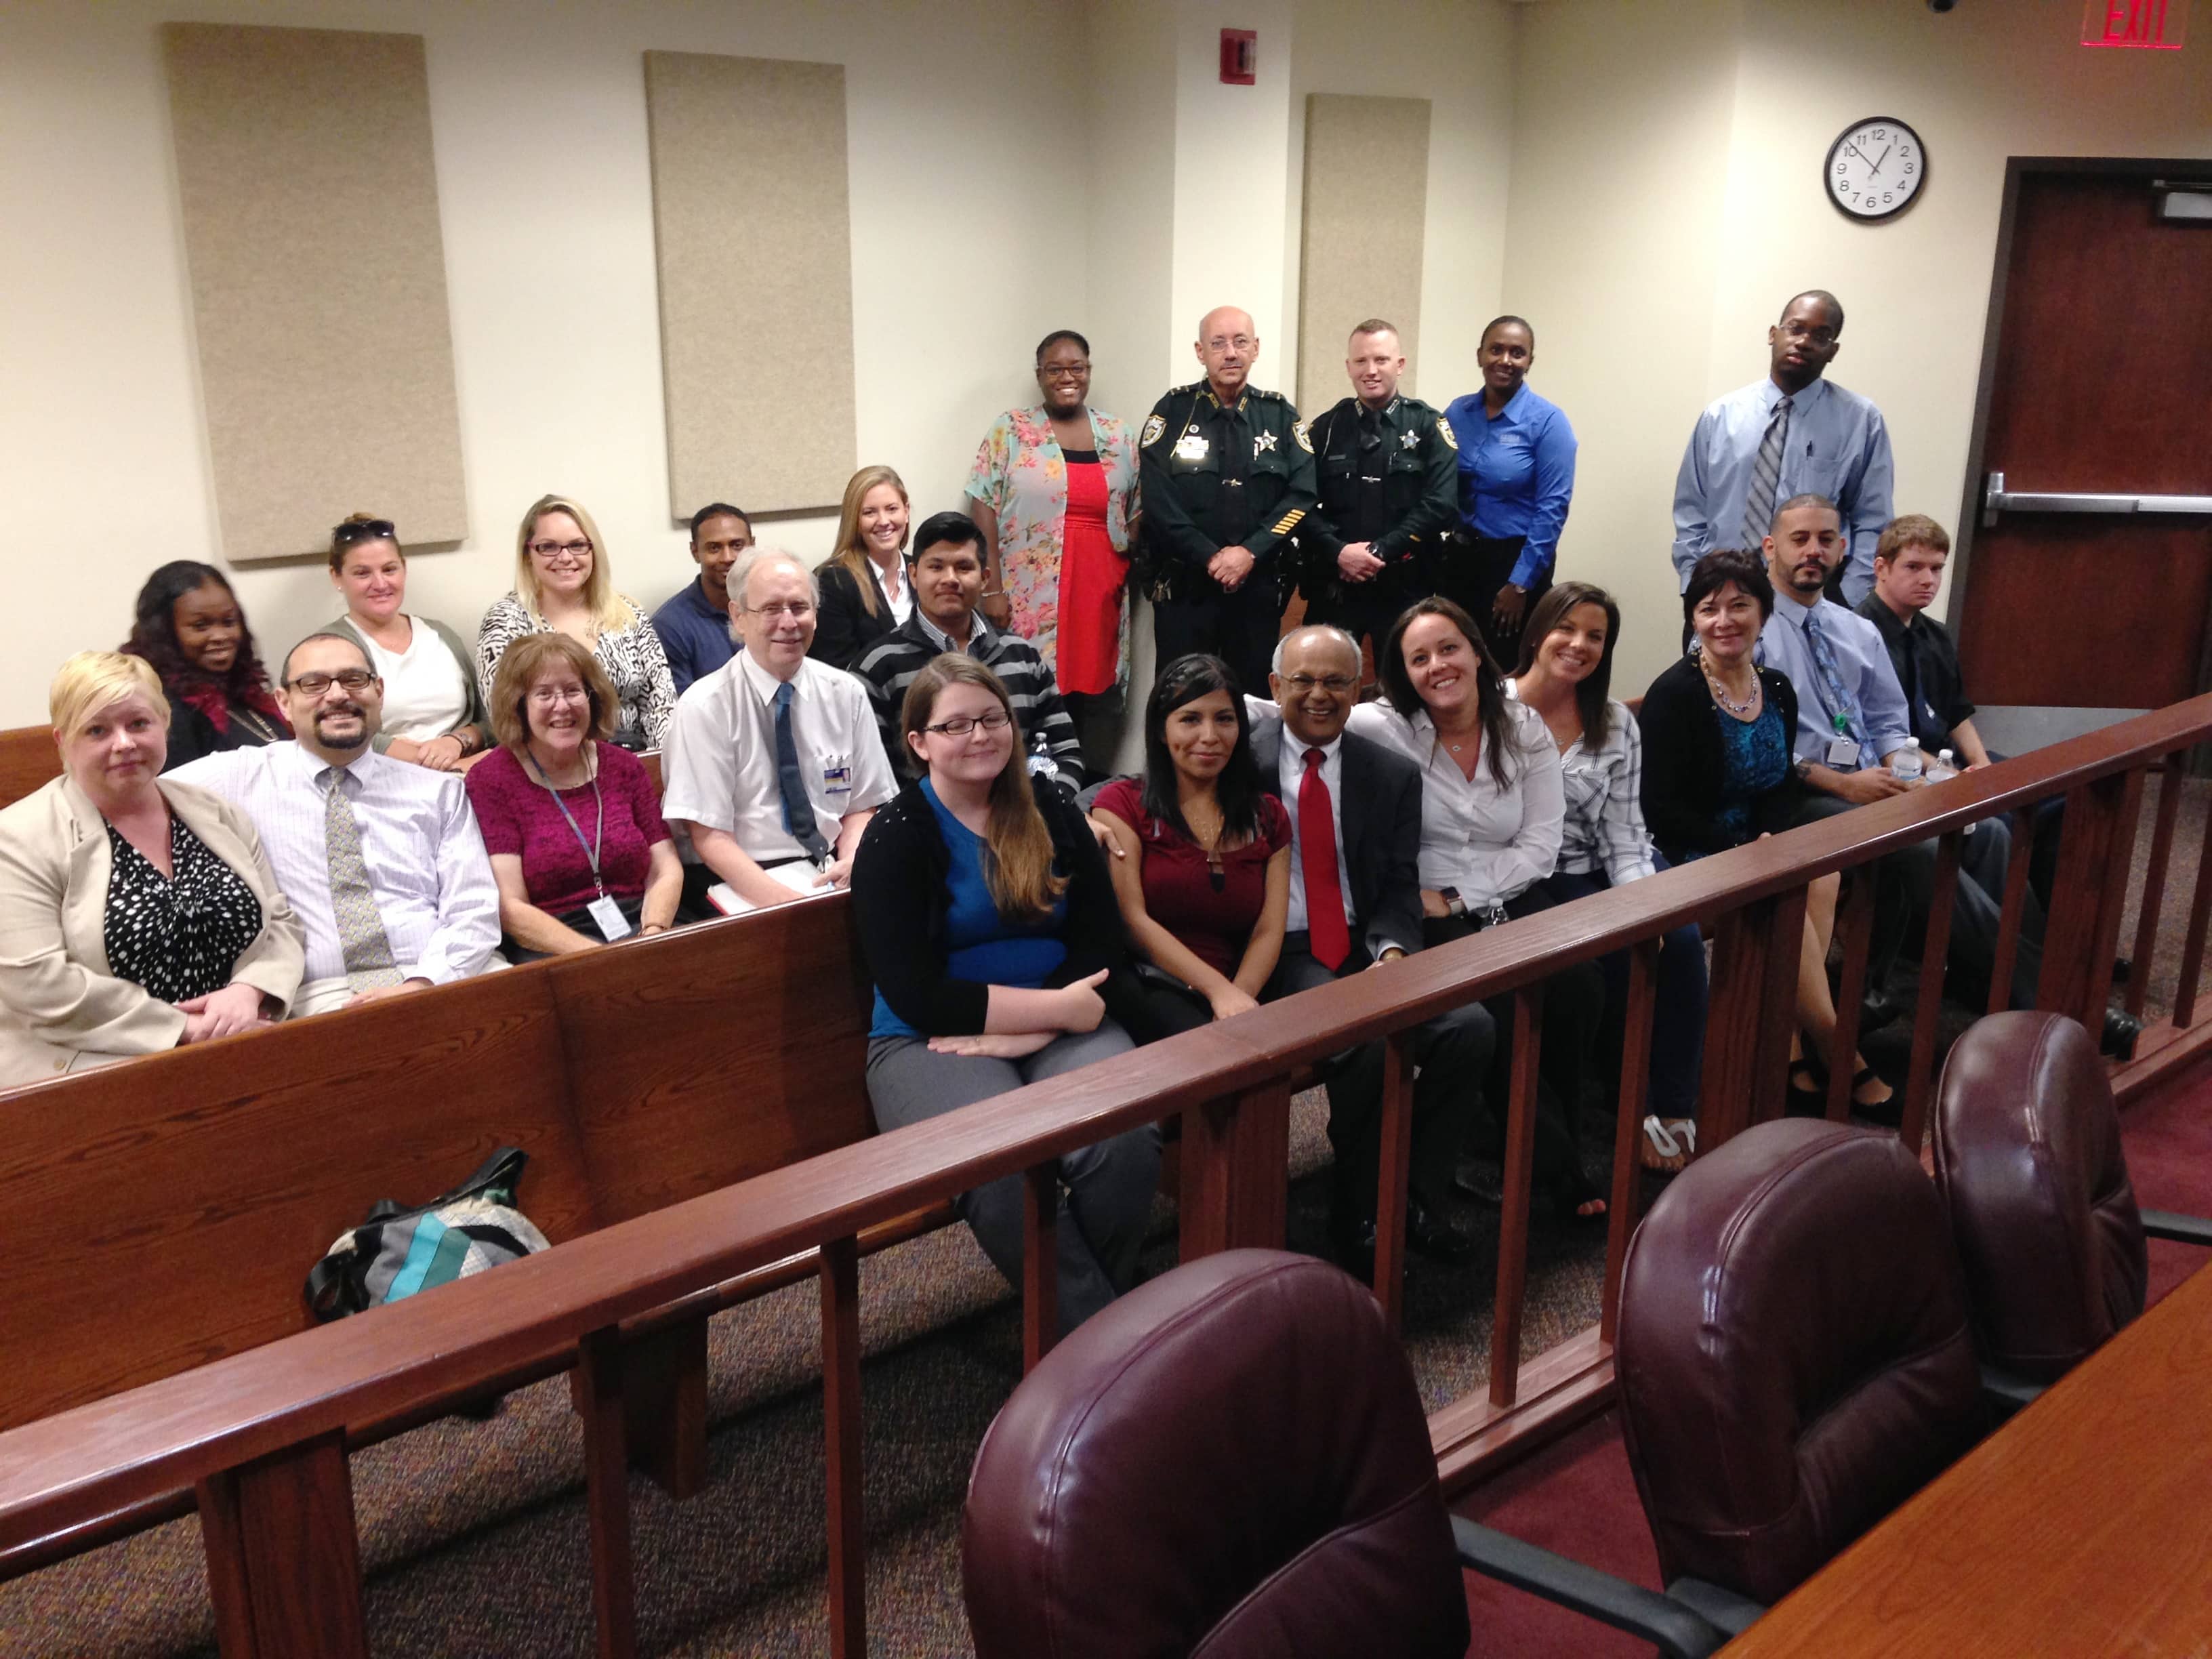 Port St. Lucie has a “Law Day” Field Trip